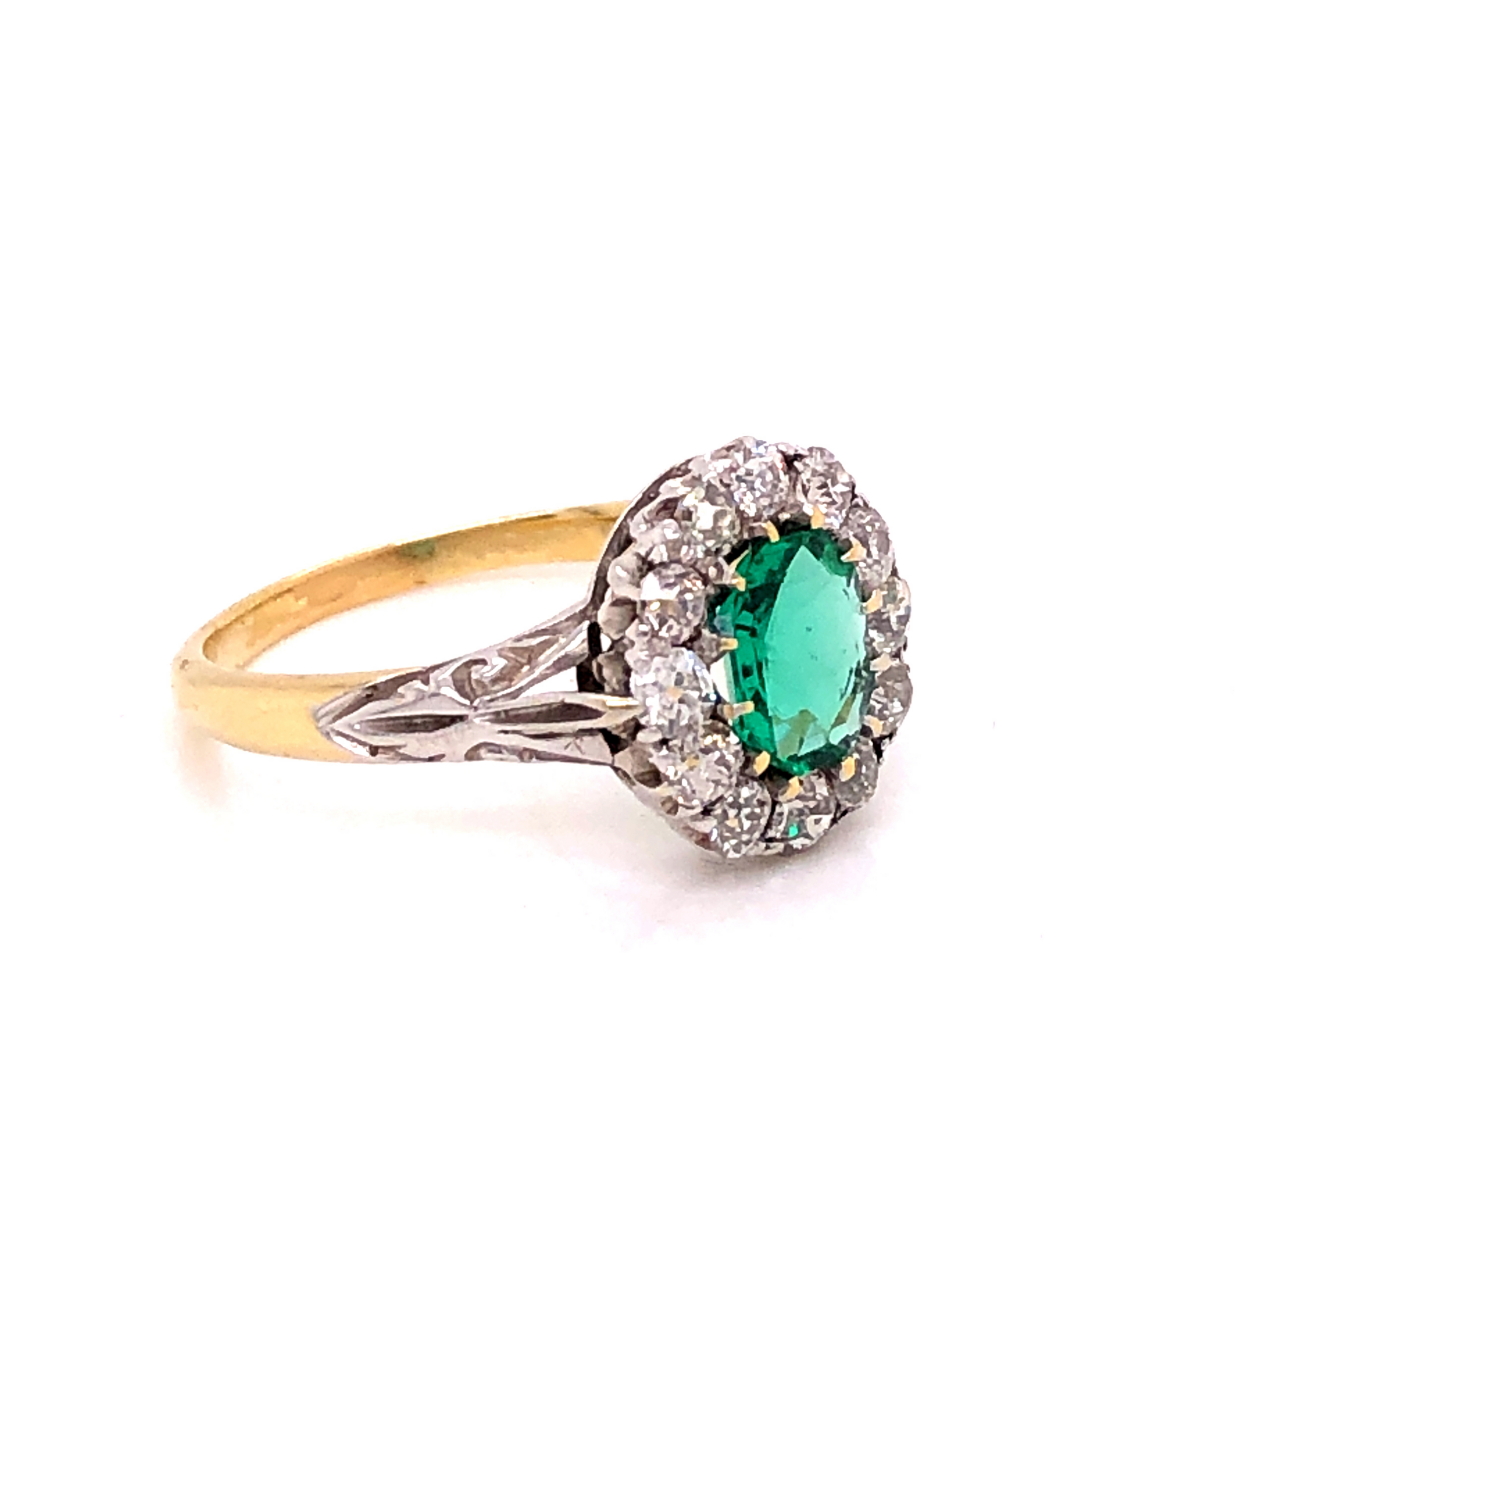 AN EMERALD AND DIAMOND CLUSTER RING. THE PRINCIPLE MIXED CUT EMERALD IN A TWELVE CLAW SETTING - Image 8 of 17